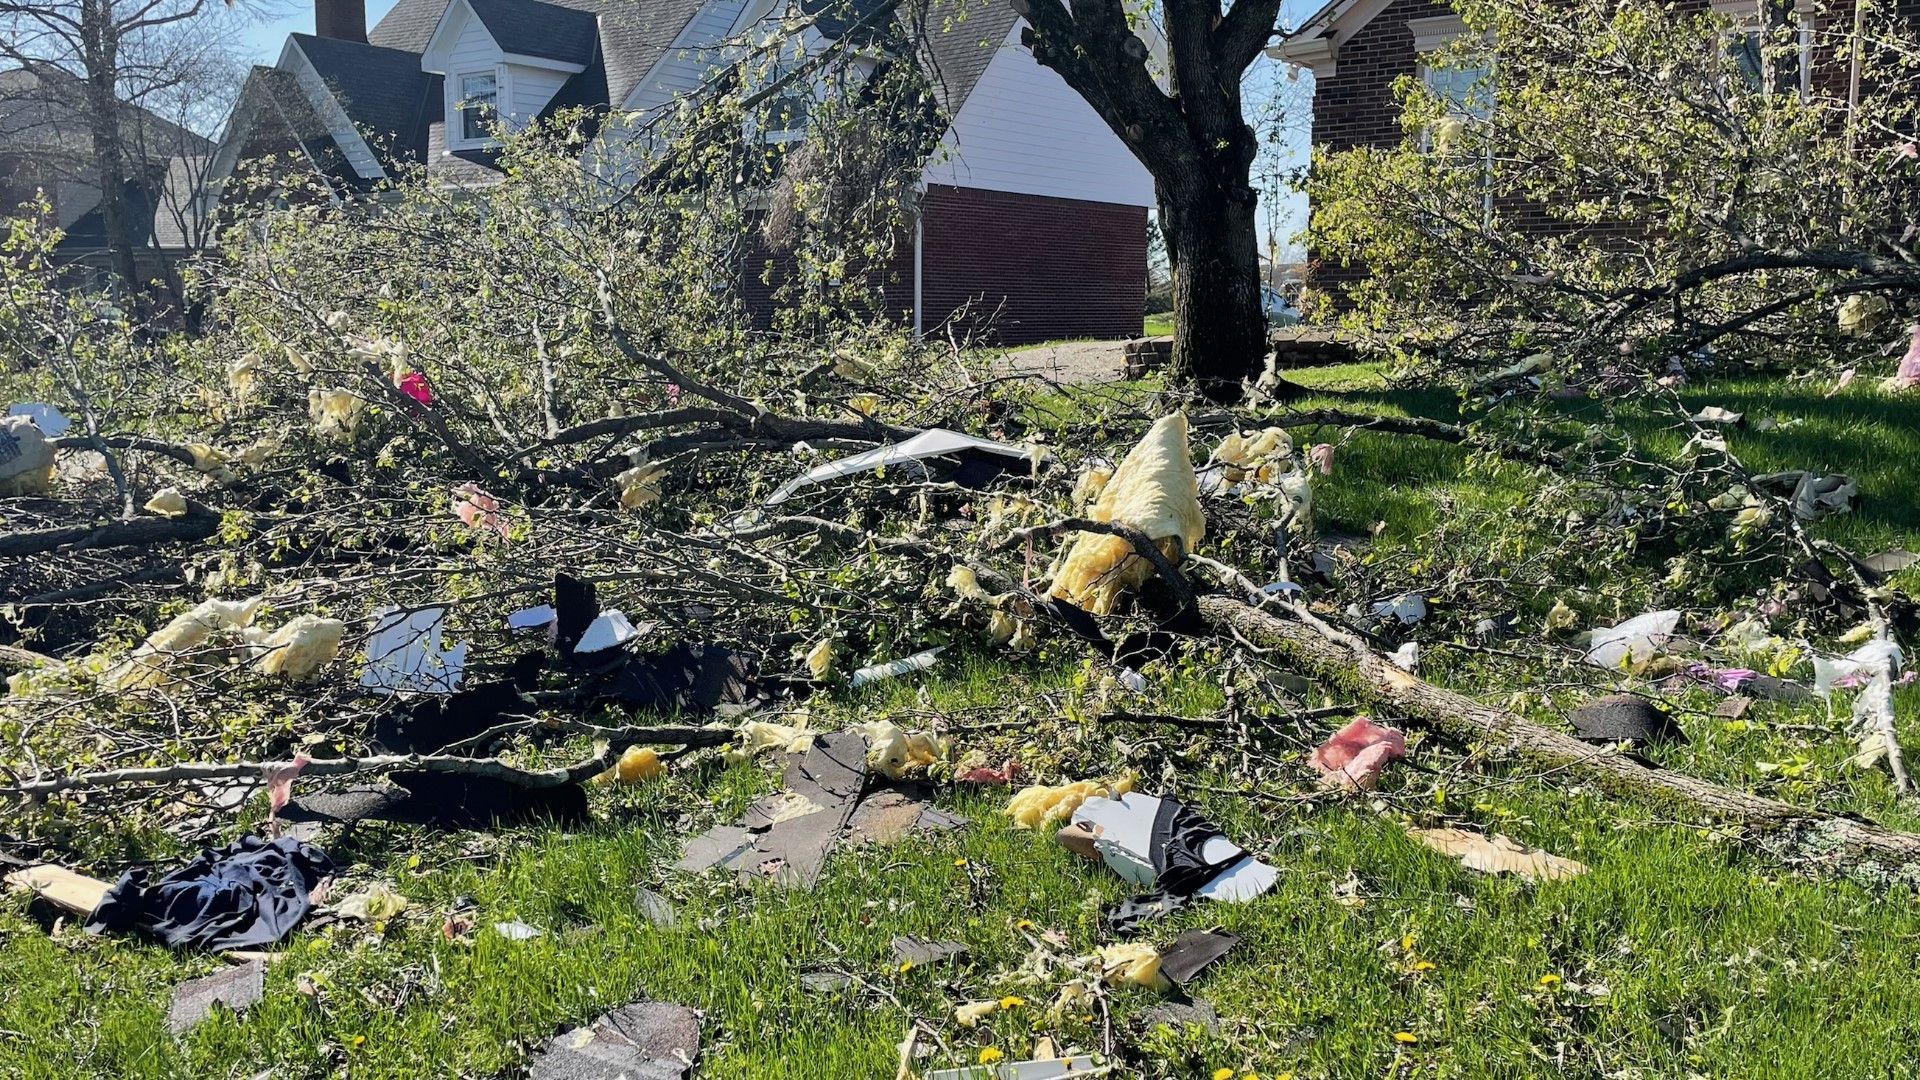 Two weeks after a tornado touched down in Southeast Jefferson County, Tiffany Meares is still rebuilding, and said she's thankful her family and neighbors are safe.